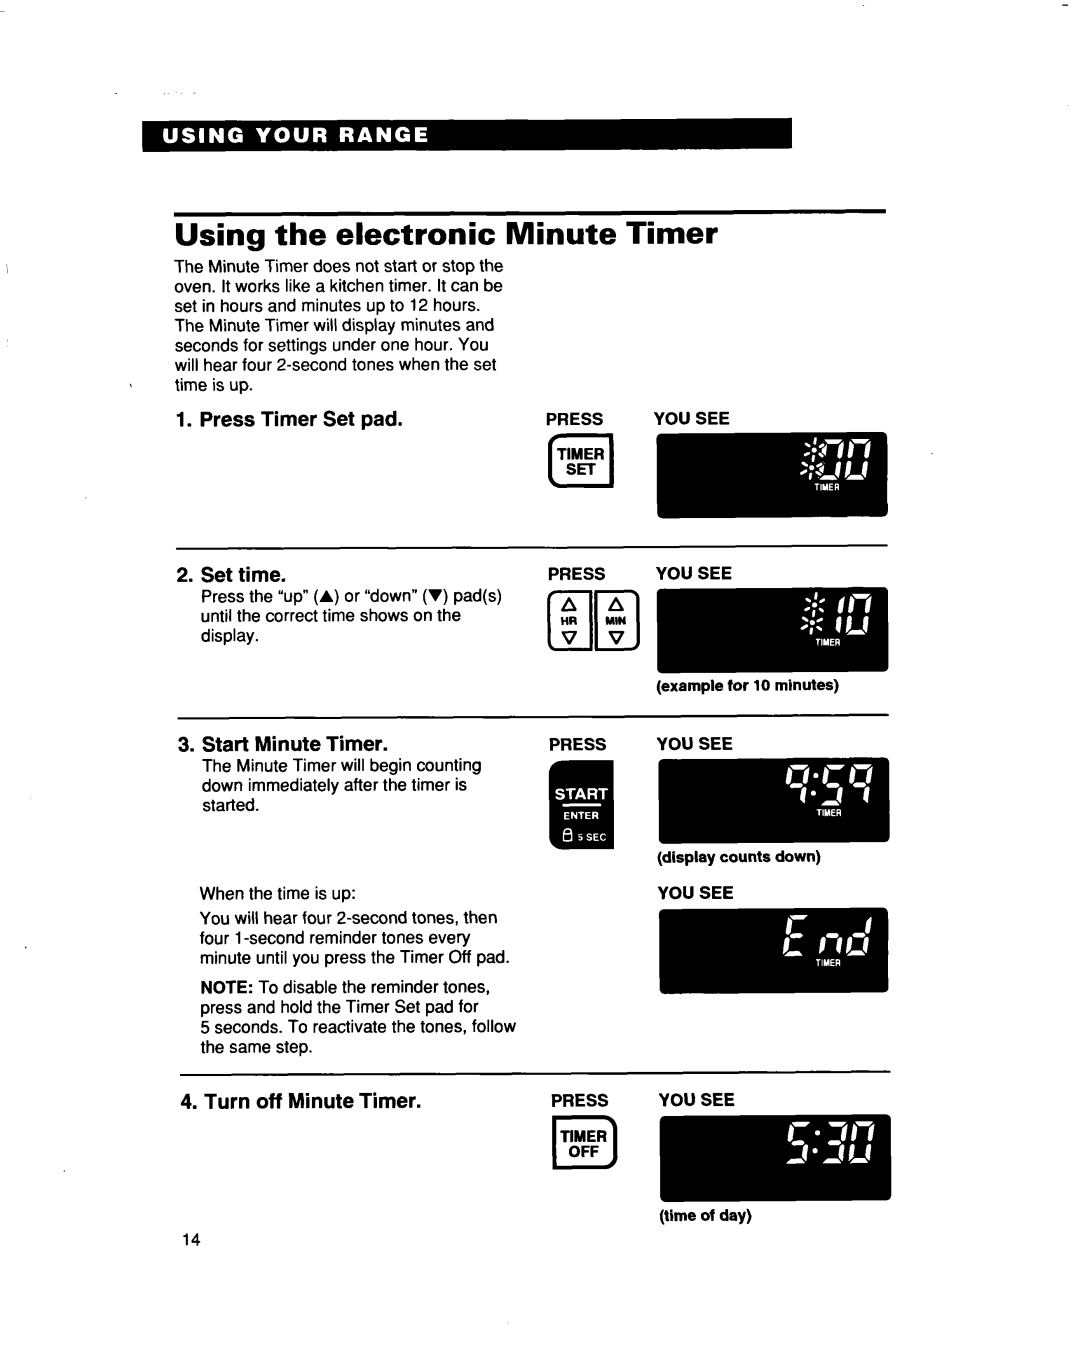 Whirlpool RF386PXD warranty Using the electronic Minute Timer, Press Timer Set pad, Set time, Start Minute Timer, Turn 